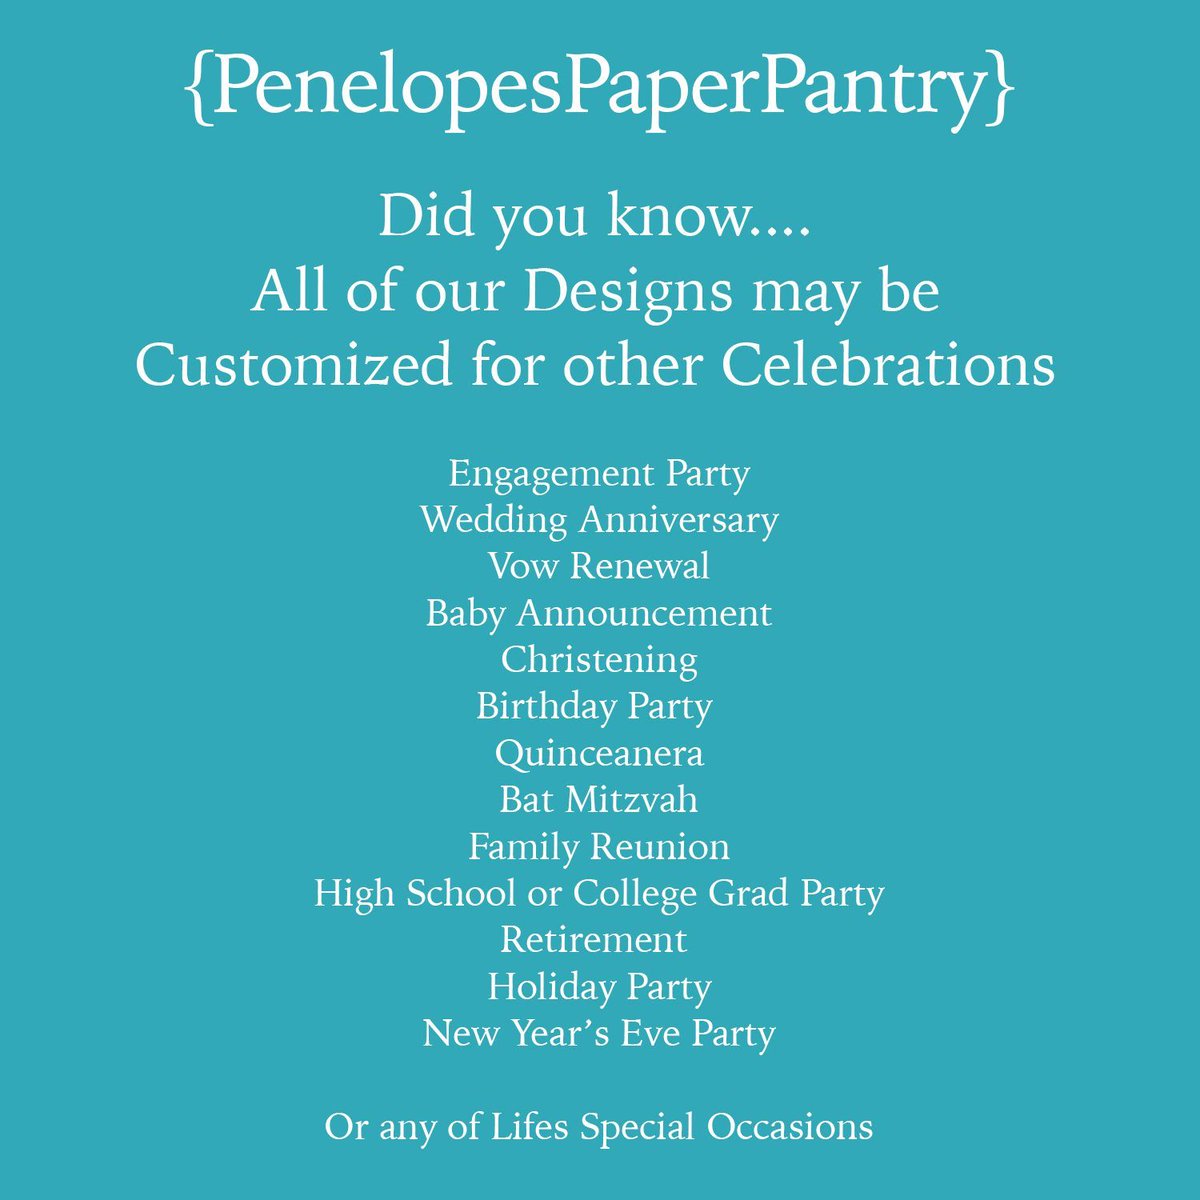 Did you know....
All of our Designs may be Customized for other Celebrations.
PenelopesPaperPantry.etsy.com
.
.
.
.
.
.
.
.
#wedding #wedo #inlove #bride #groom #brideandgroom #engagment #shesaidyes #ido #futuremrs #soontobemrs #bridal #inlove #weddingseason #penelopespaperpantry #sale